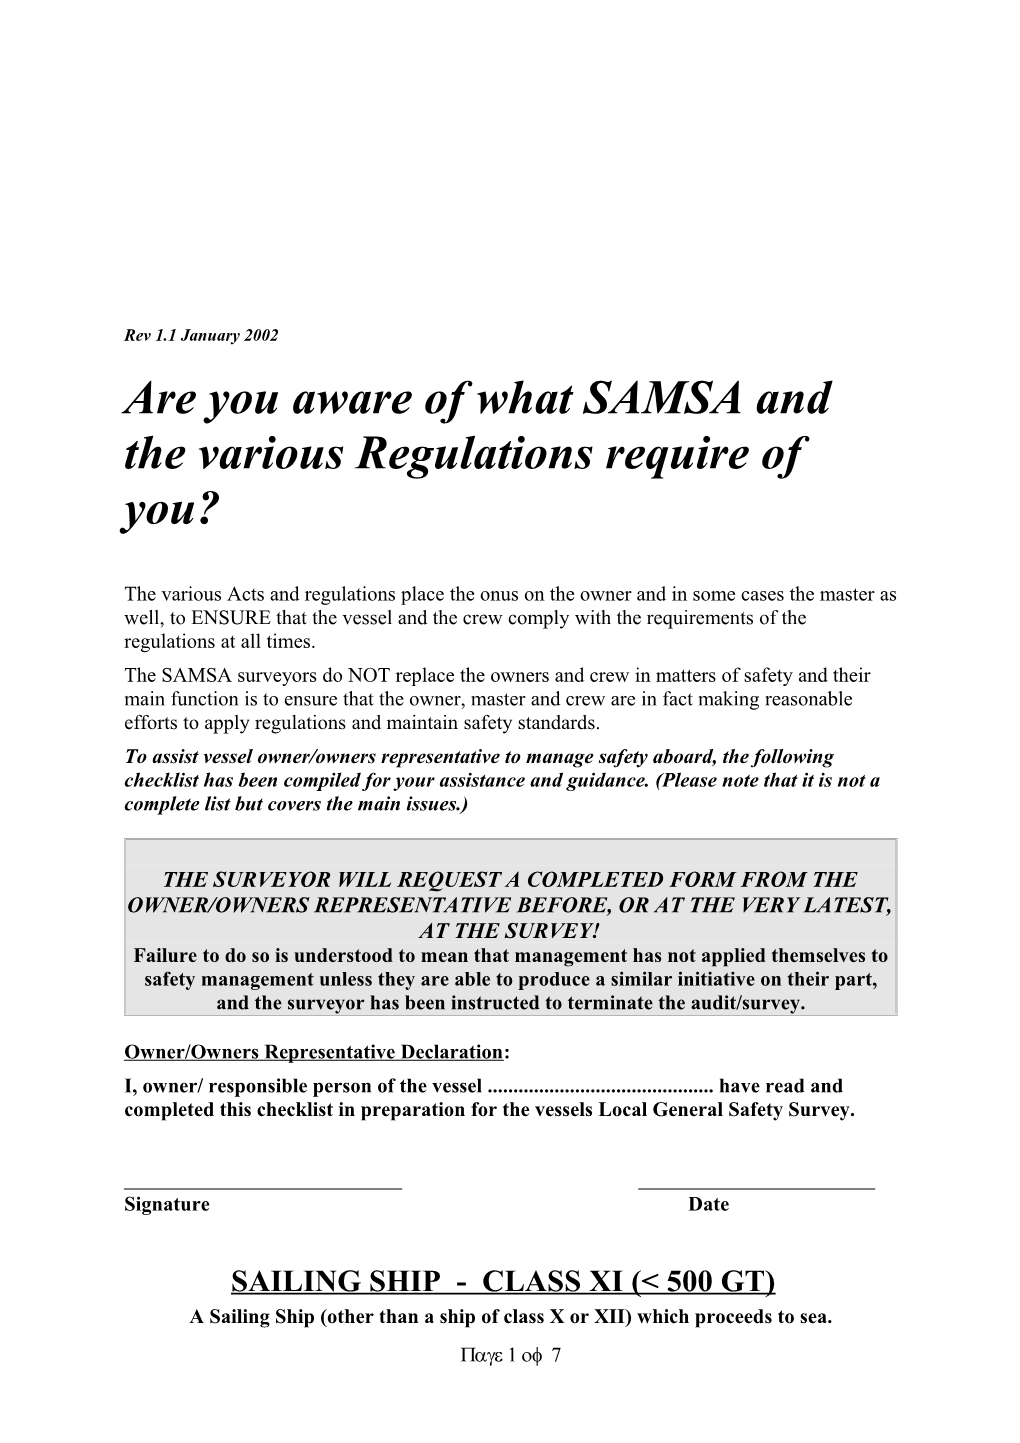 Are You Aware of What SAMSA and the Various Regulations Require of You?